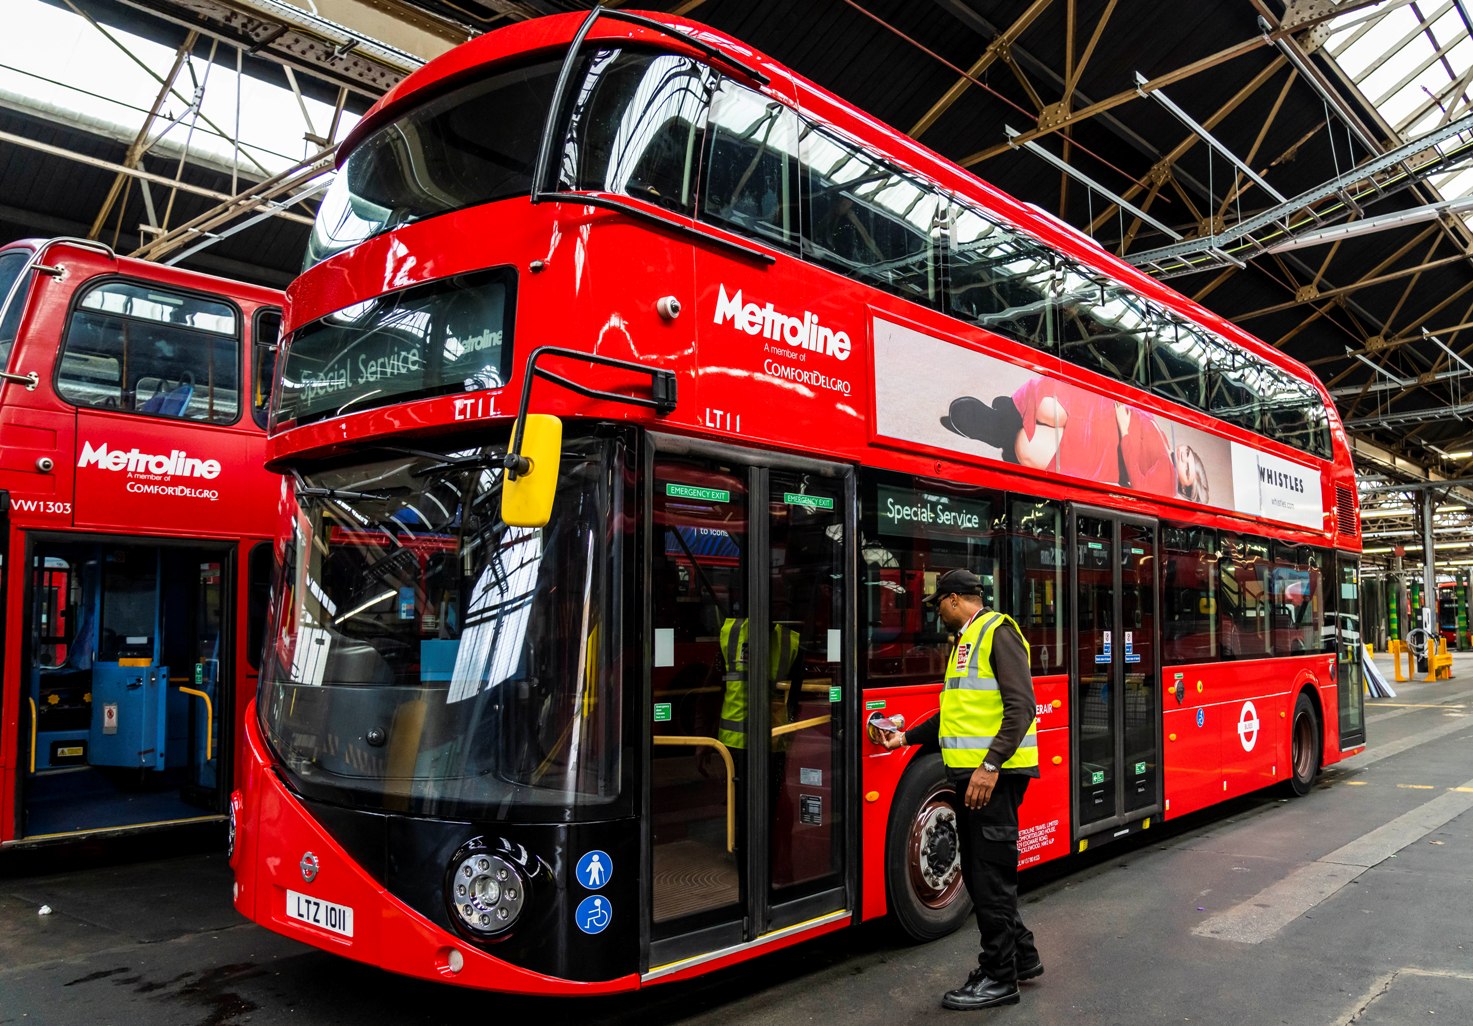 The New Routemaster bus with fully electric drivetrain is undergoing testing in London